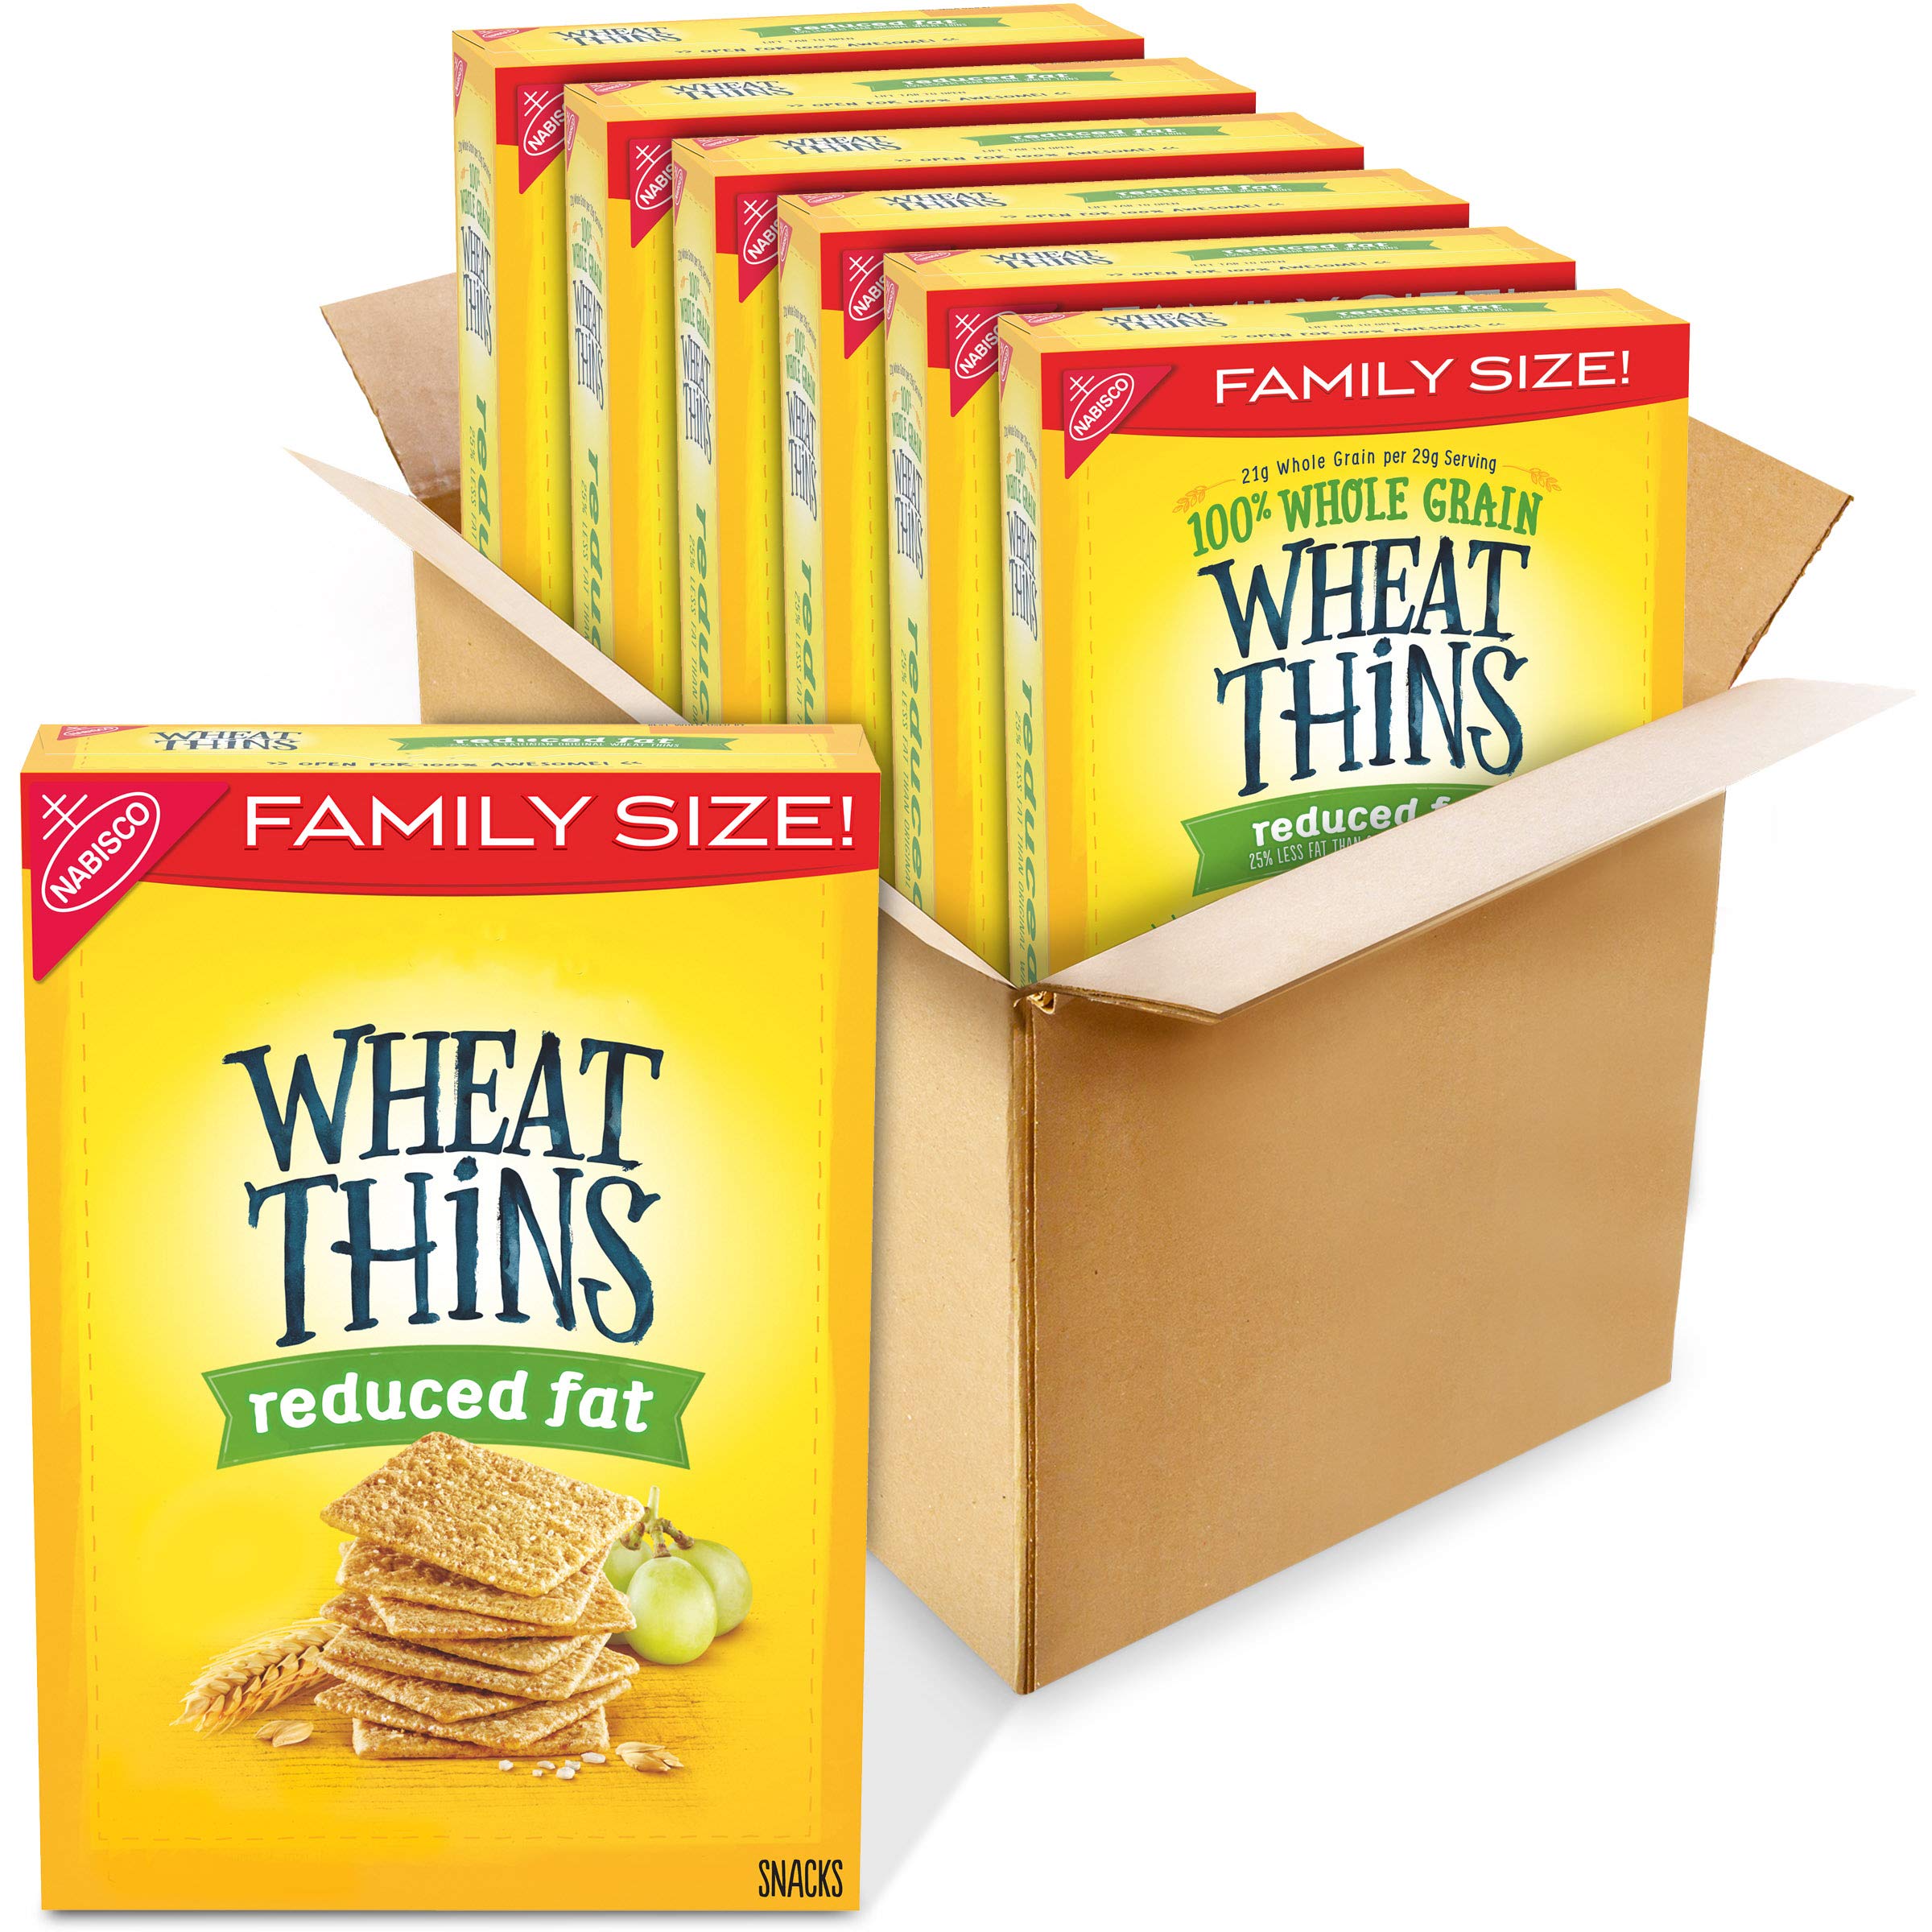 Wheat Thins Reduced Fat Whole Grain Wheat Crackers, Family Size, 6 - 14.5 Ounce Boxes (Pack of 6)